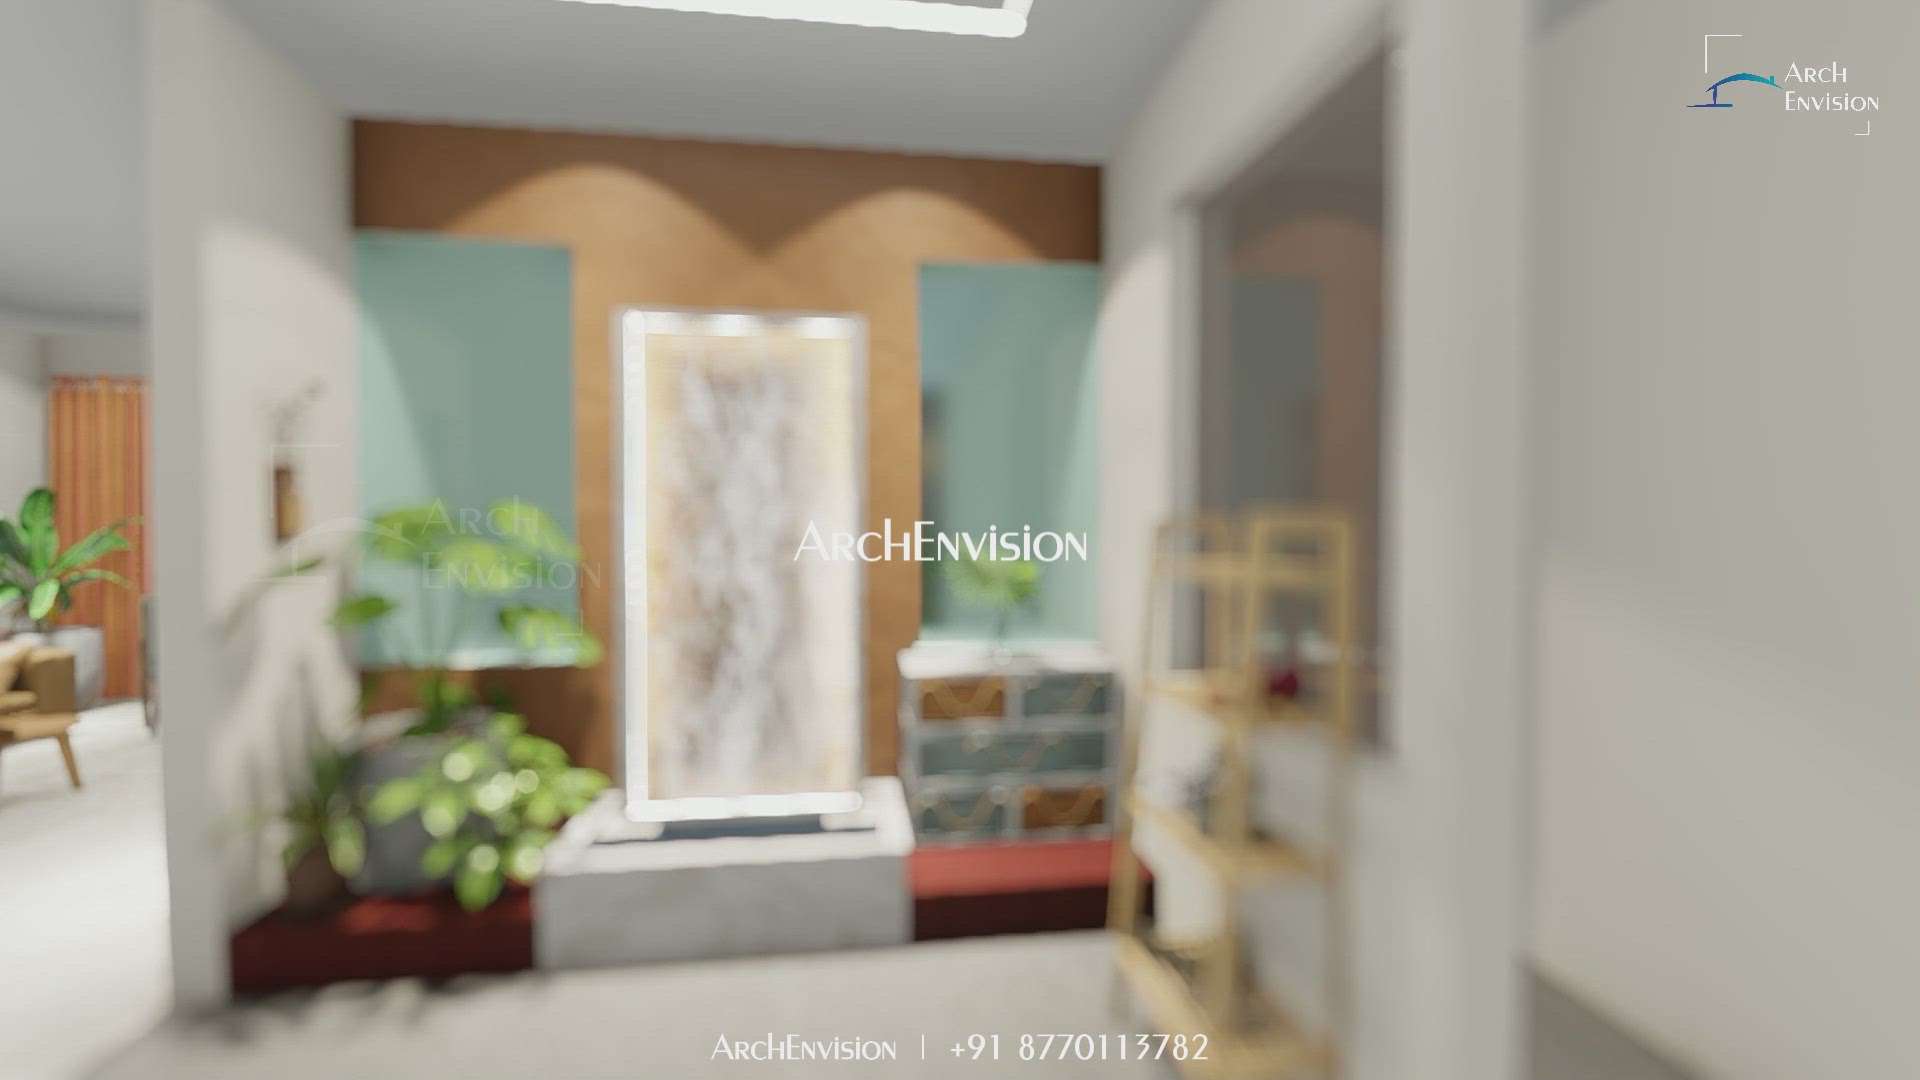 Creating a Welcoming Entryway.........
By: @archenvision

#archenvision #interiordesign #architecture #plants #foyerdecor #foyer #entry #homedecor #viral #viralvideos #viralreels #instagood #instareels #inastagram #explorepage #explore #trending #trendingreels #trendingsongs #3drendering #walkthrough #lumion #likesforlike #like #instalike #lifestyle #planning #buddha #waterfountain #fountain